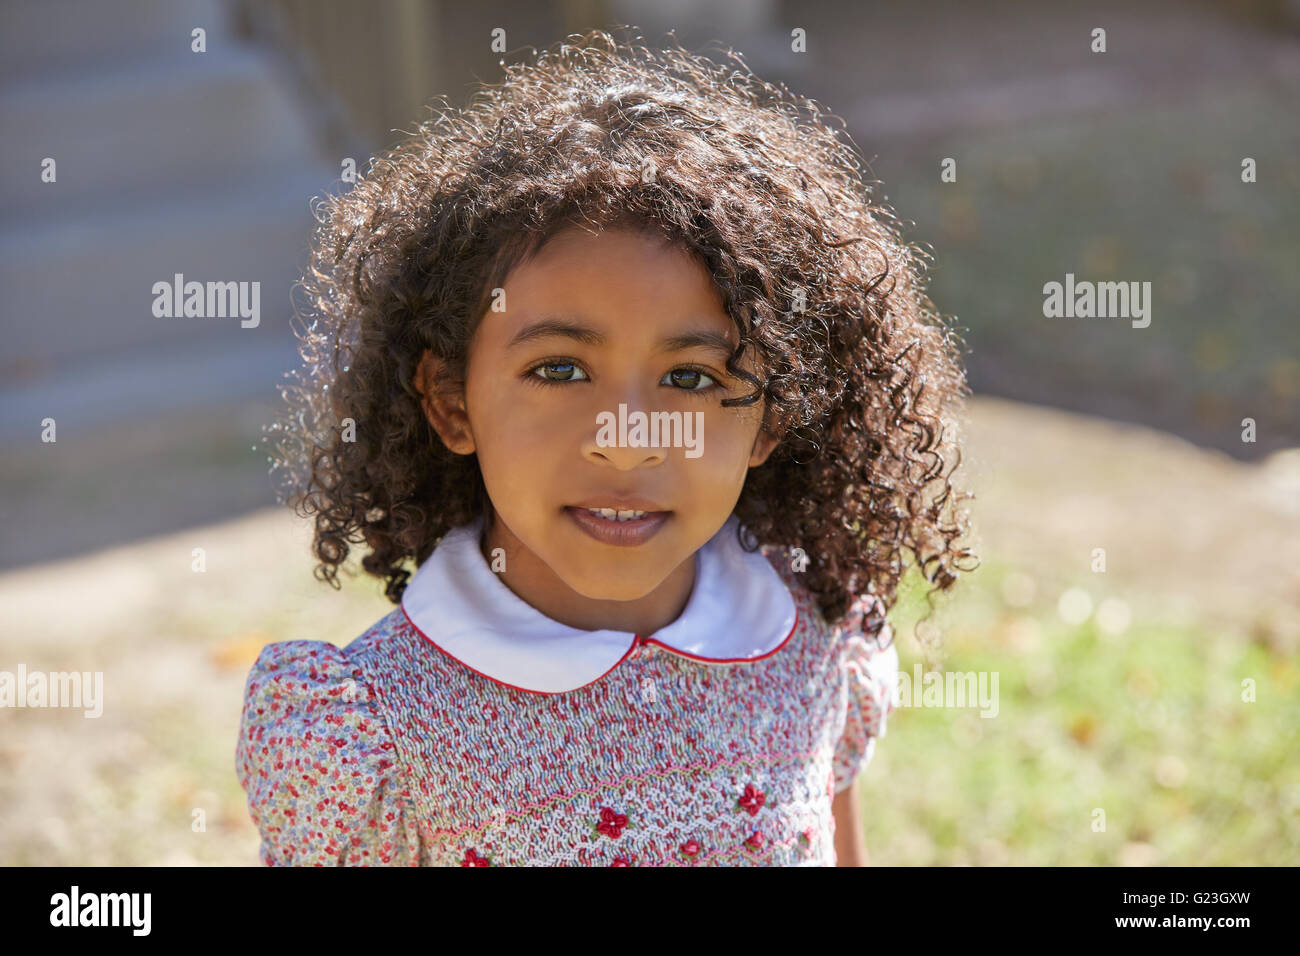 Toddler kid girl portrait latin ethnicity with flowers dress Stock Photo